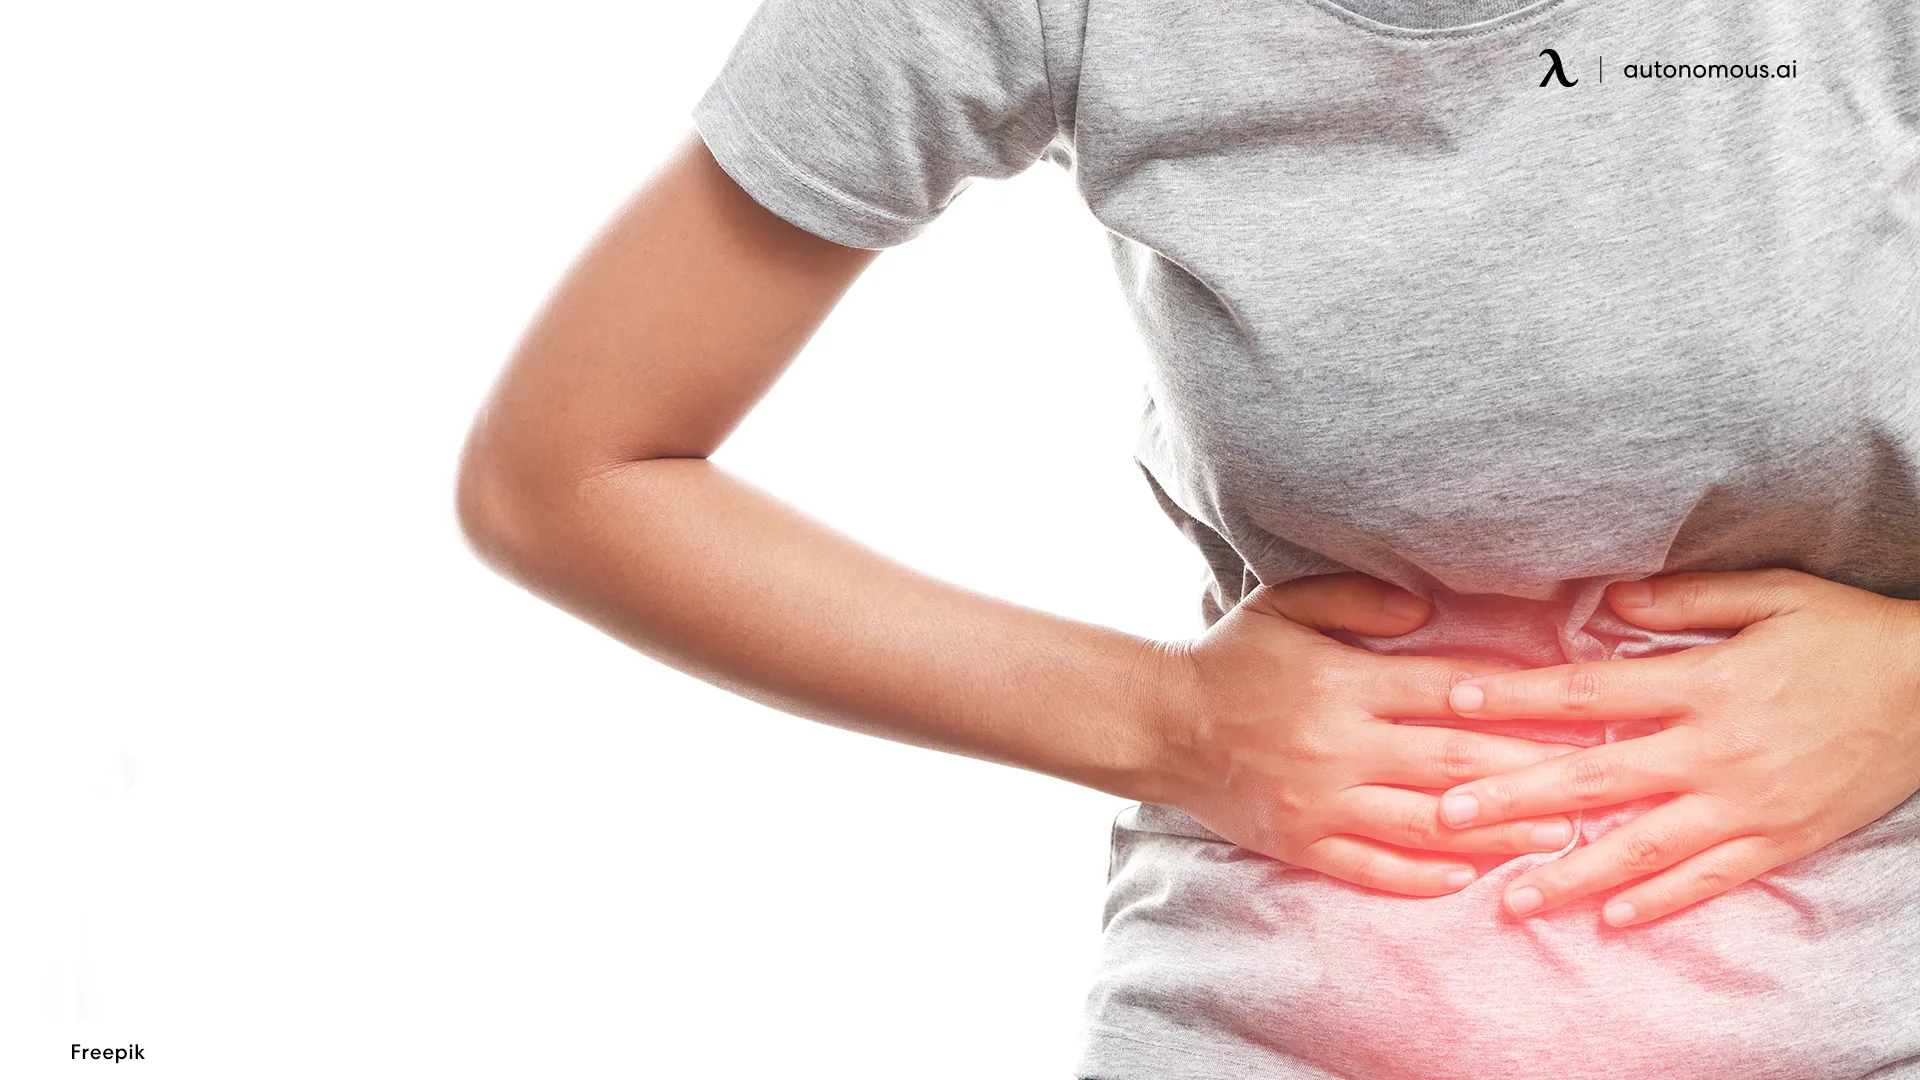 Increased Pressure on Your Digestive Tract